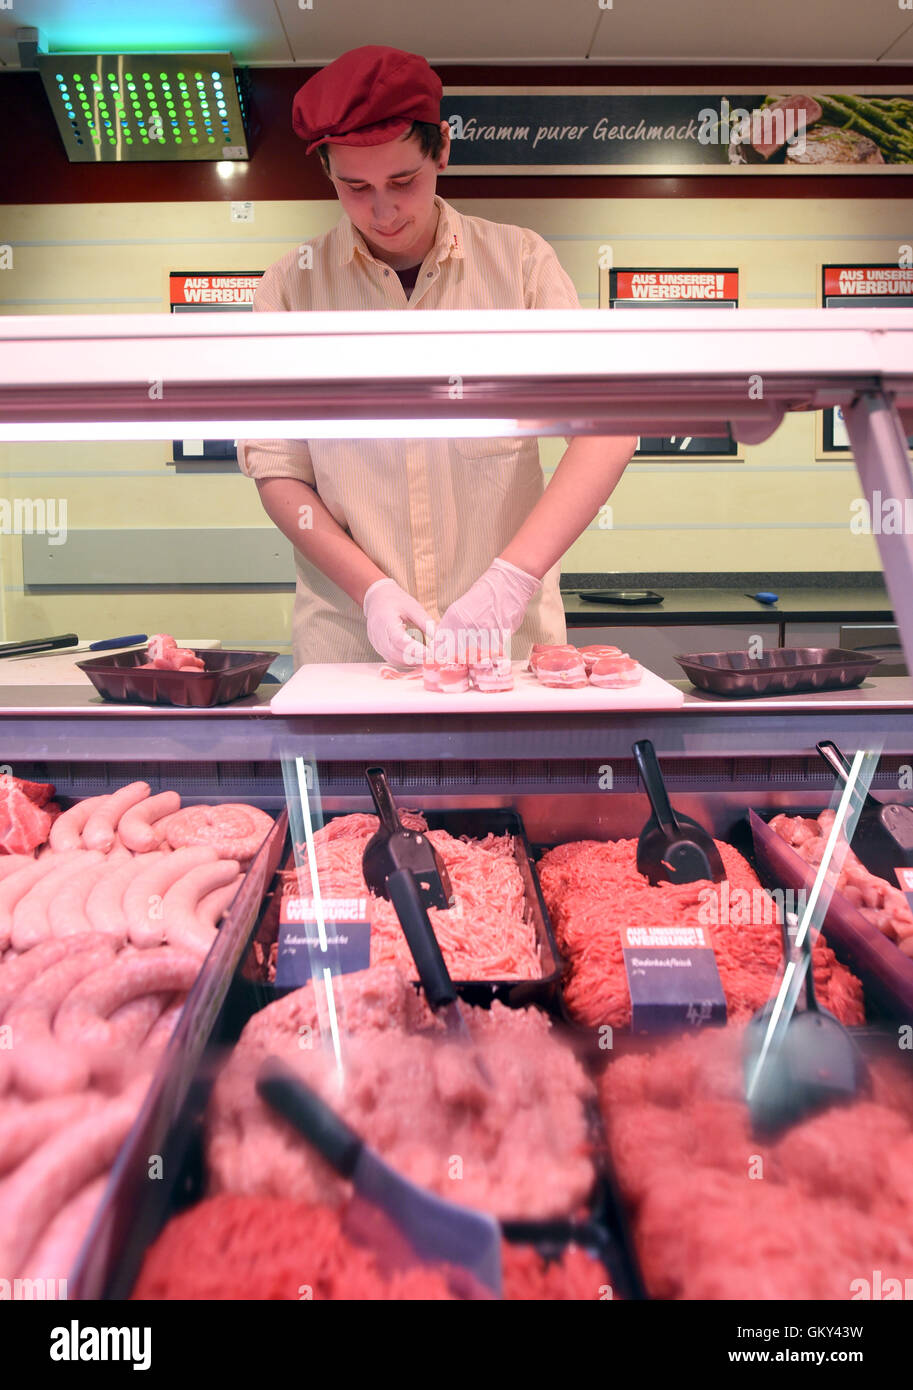 Moenchengladbach, Germany. 22nd Aug, 2016. Butcher trainee Maurice Feldbusch prepares medaillons of pork during a press appointment on the topic 'Job market factor trade: training and entry qualifications' in a branch of supermarket chain real,- SB-Warenhaus in Moenchengladbach, Germany, 22 August 2016. Photo: Henning Kaiser/dpa/Alamy Live News Stock Photo